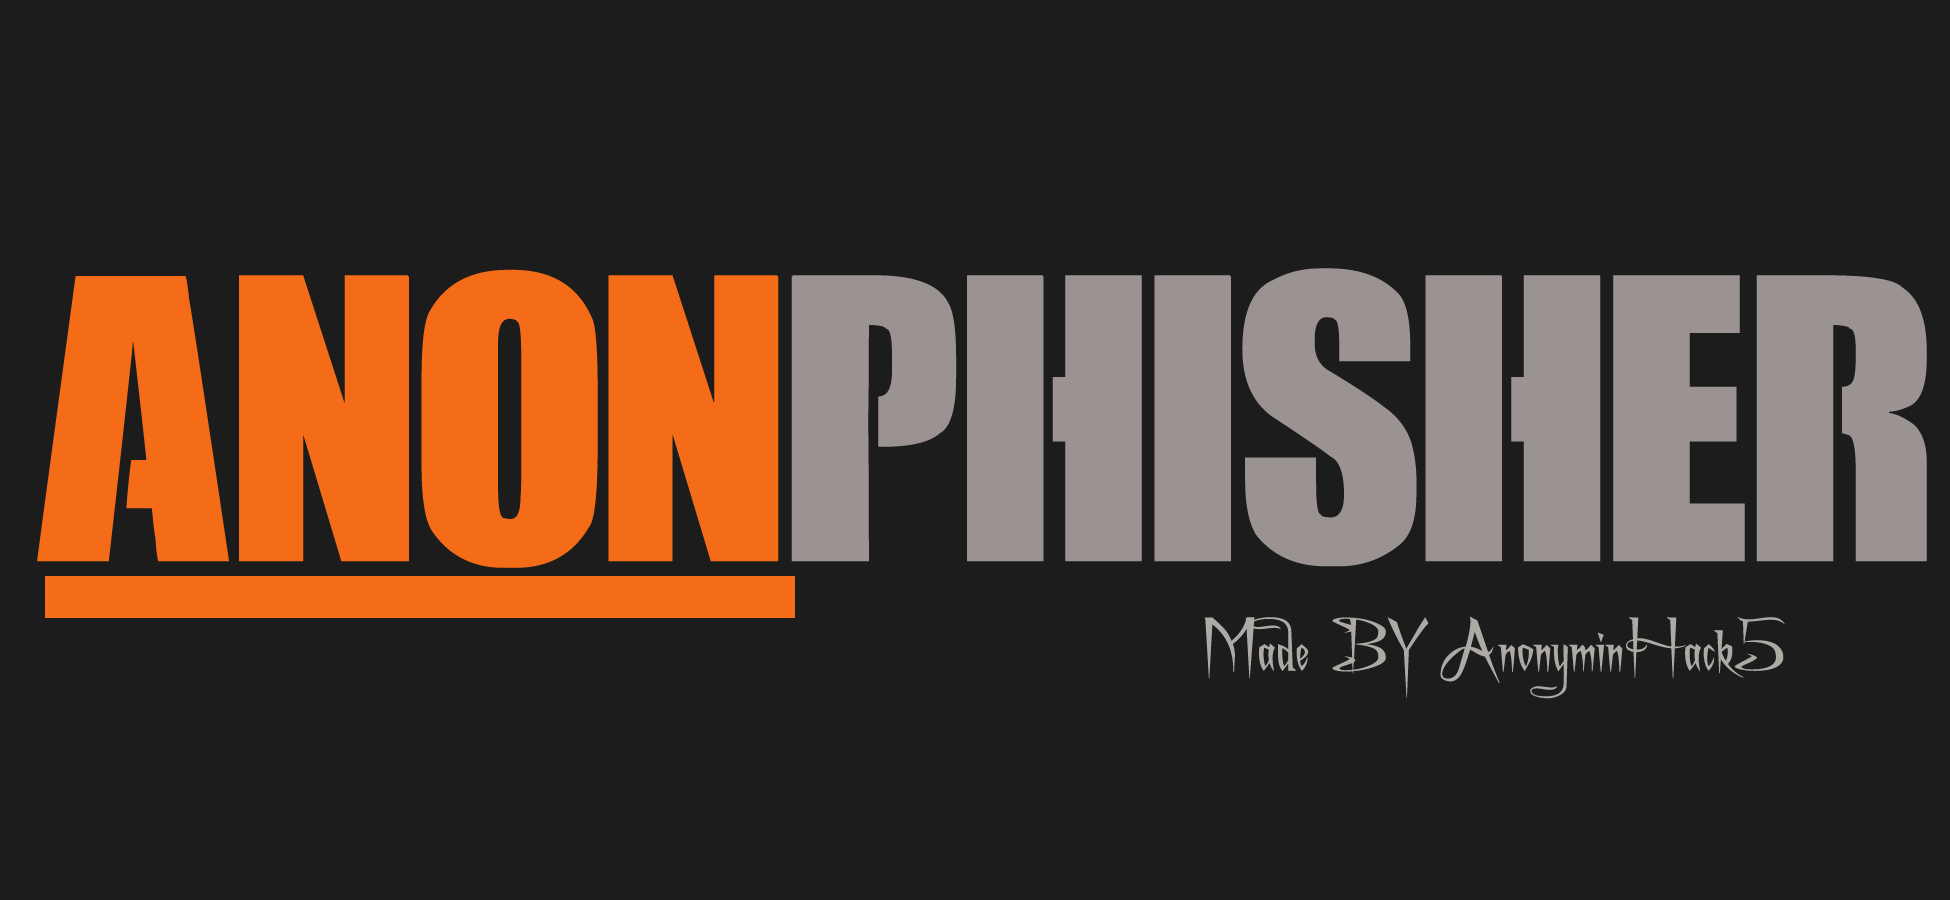 Anonphisher-banner.png